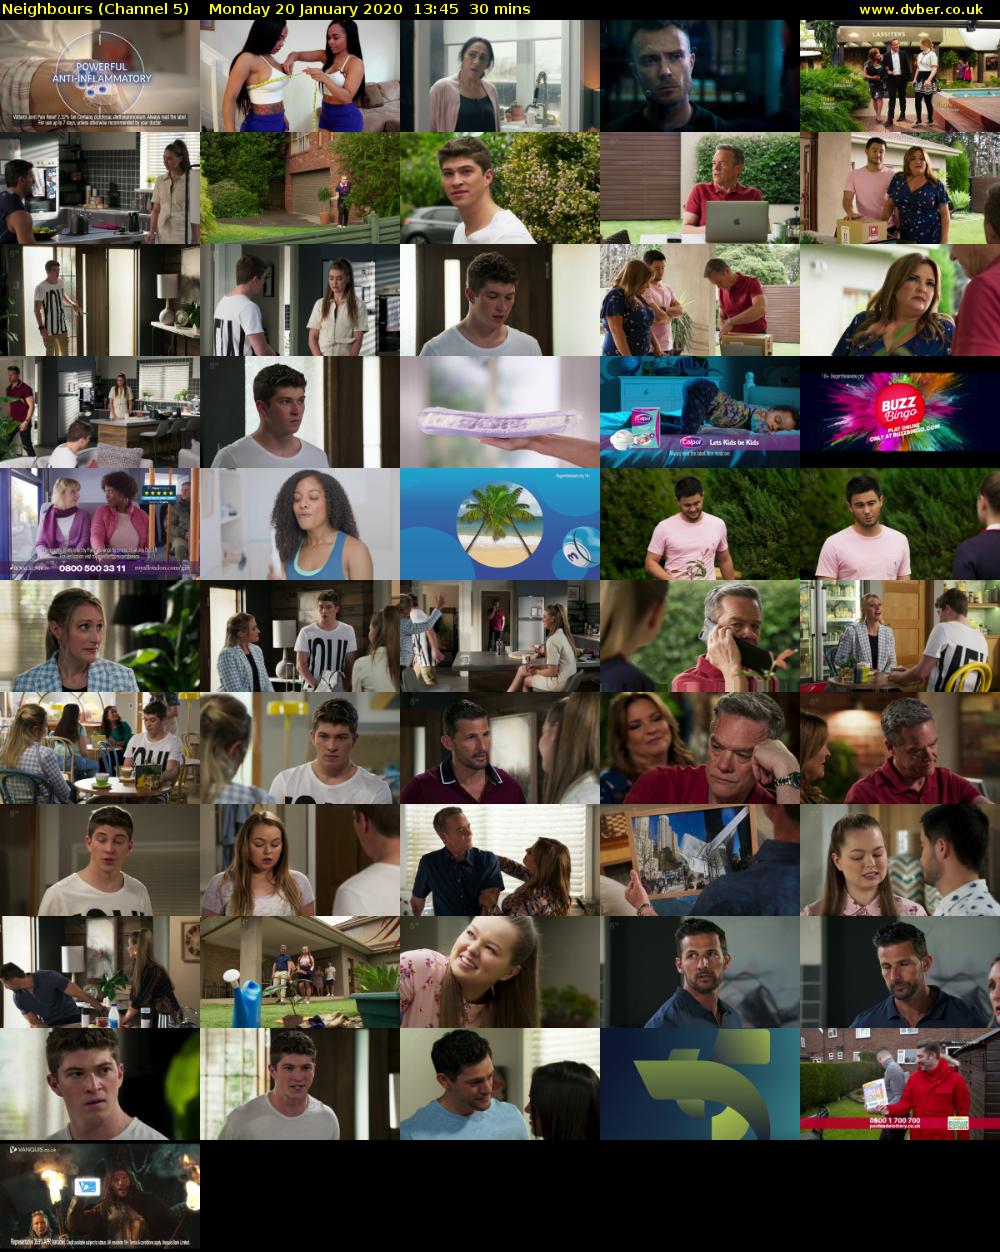 Neighbours (Channel 5) Monday 20 January 2020 13:45 - 14:15